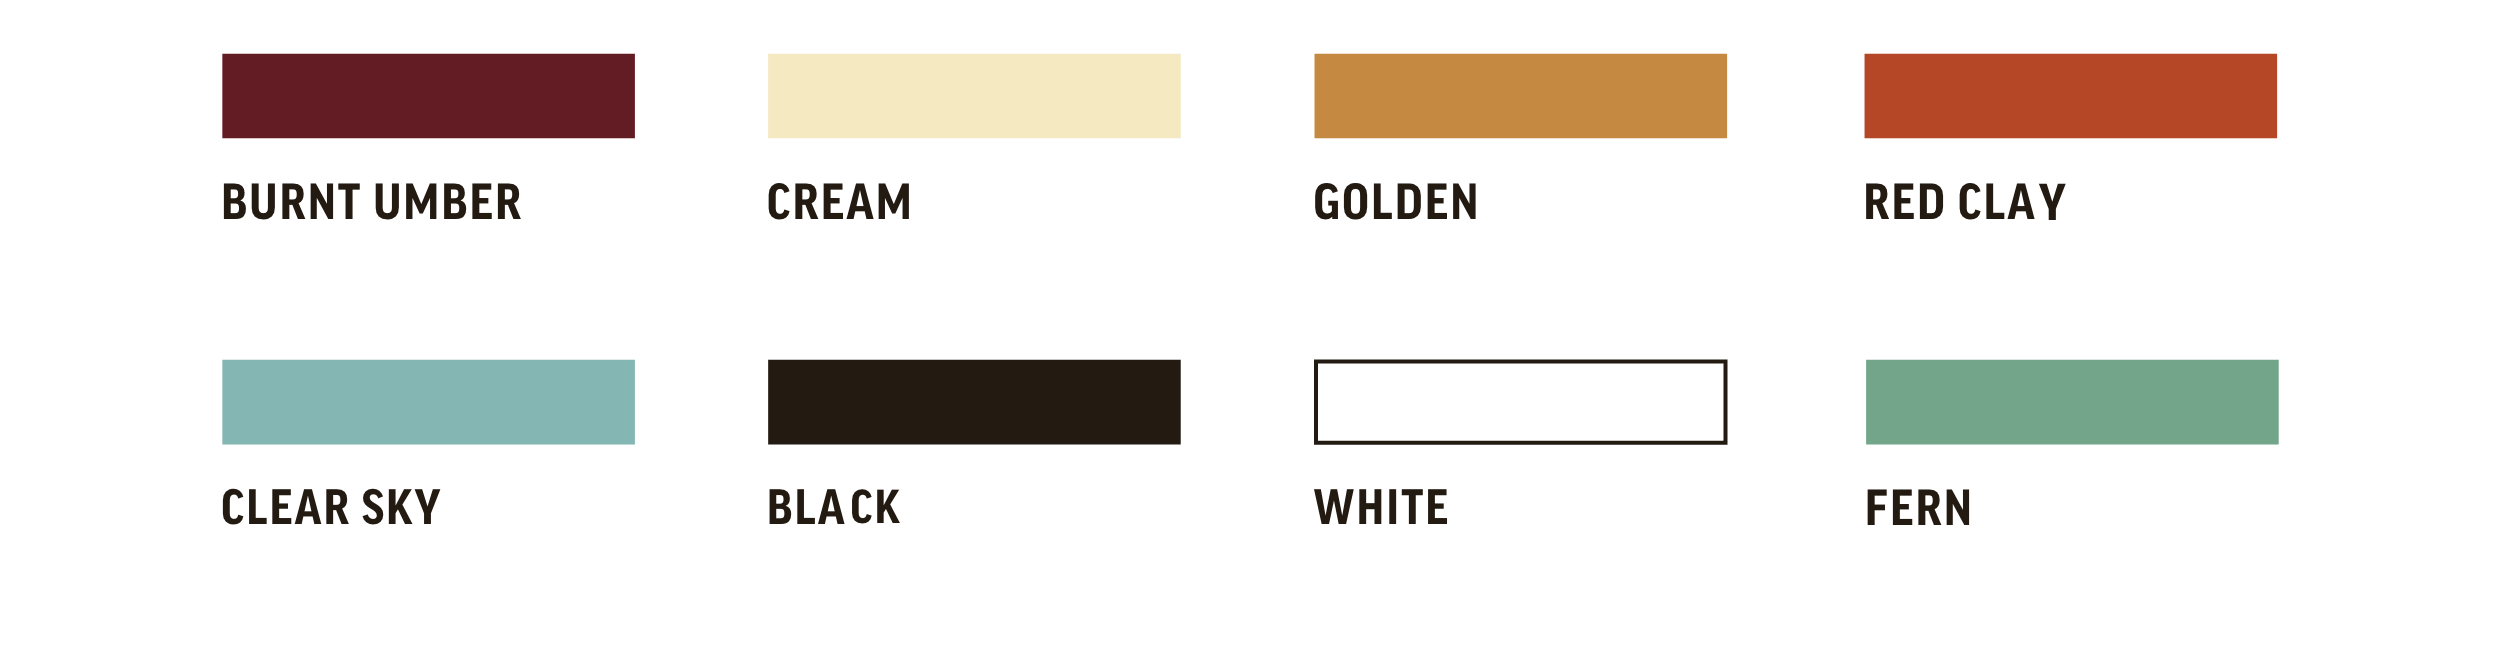 Kresston color palette laid out with colors listed as 